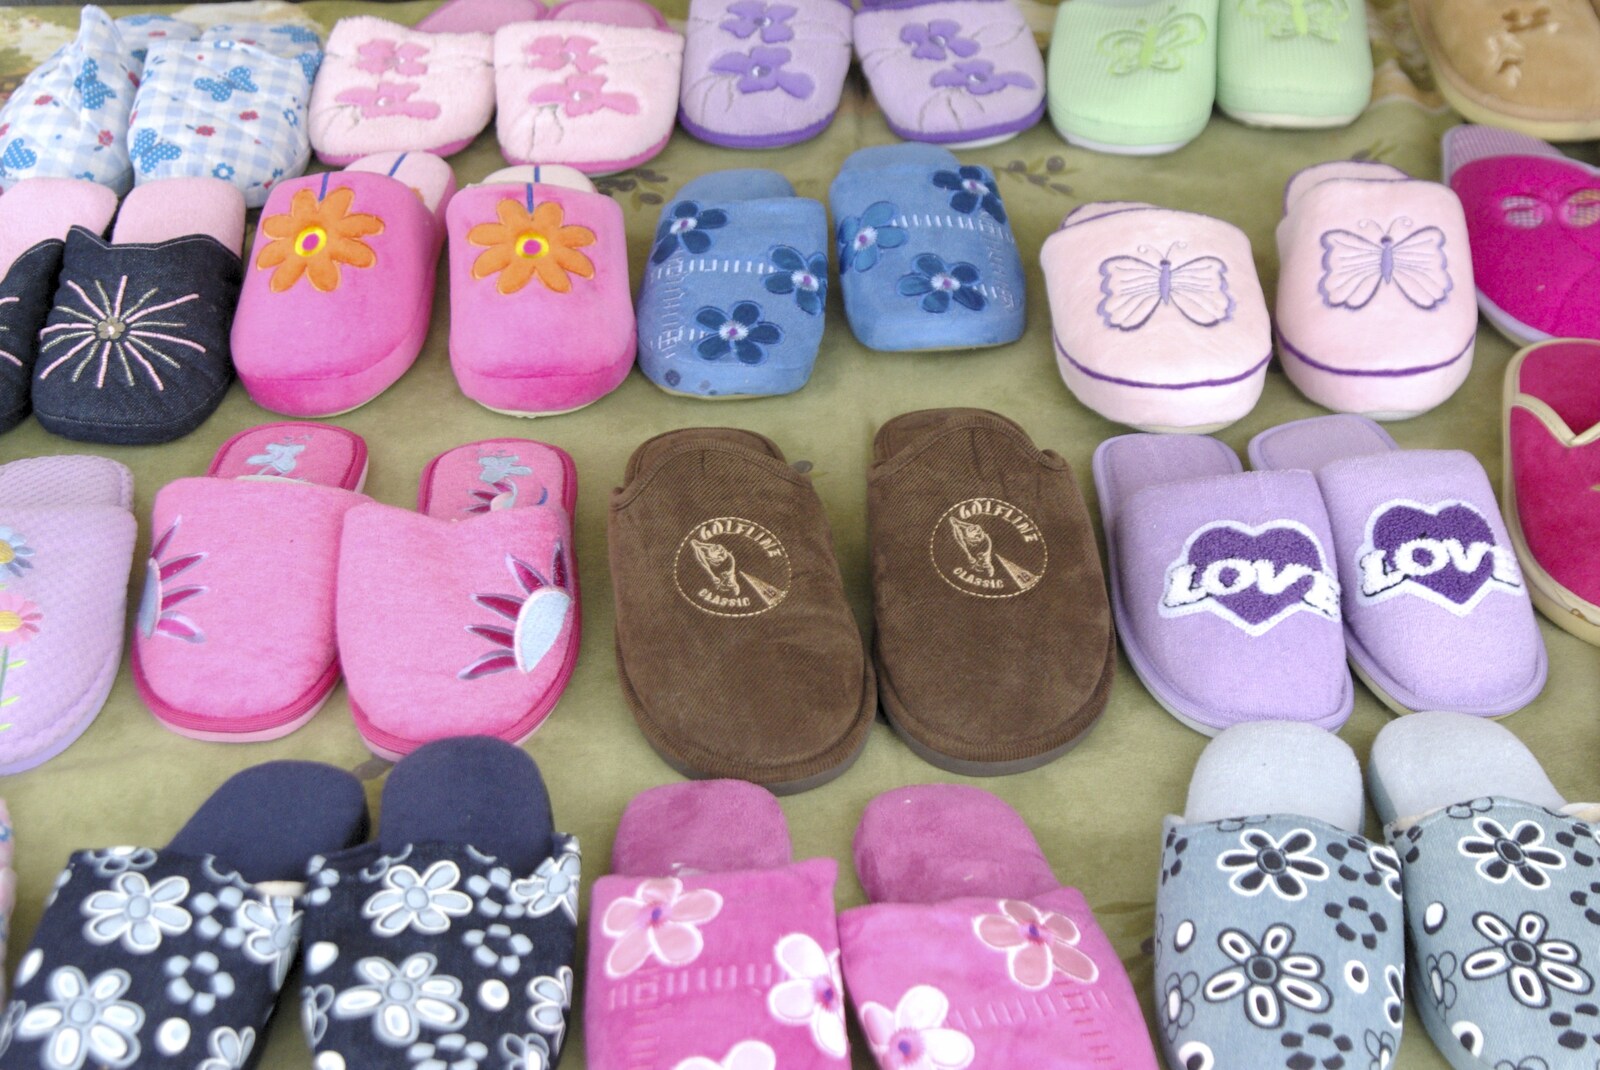 A random selection of fluffy slippers from The Christmas Markets of Brussels, Belgium - 1st January 2007